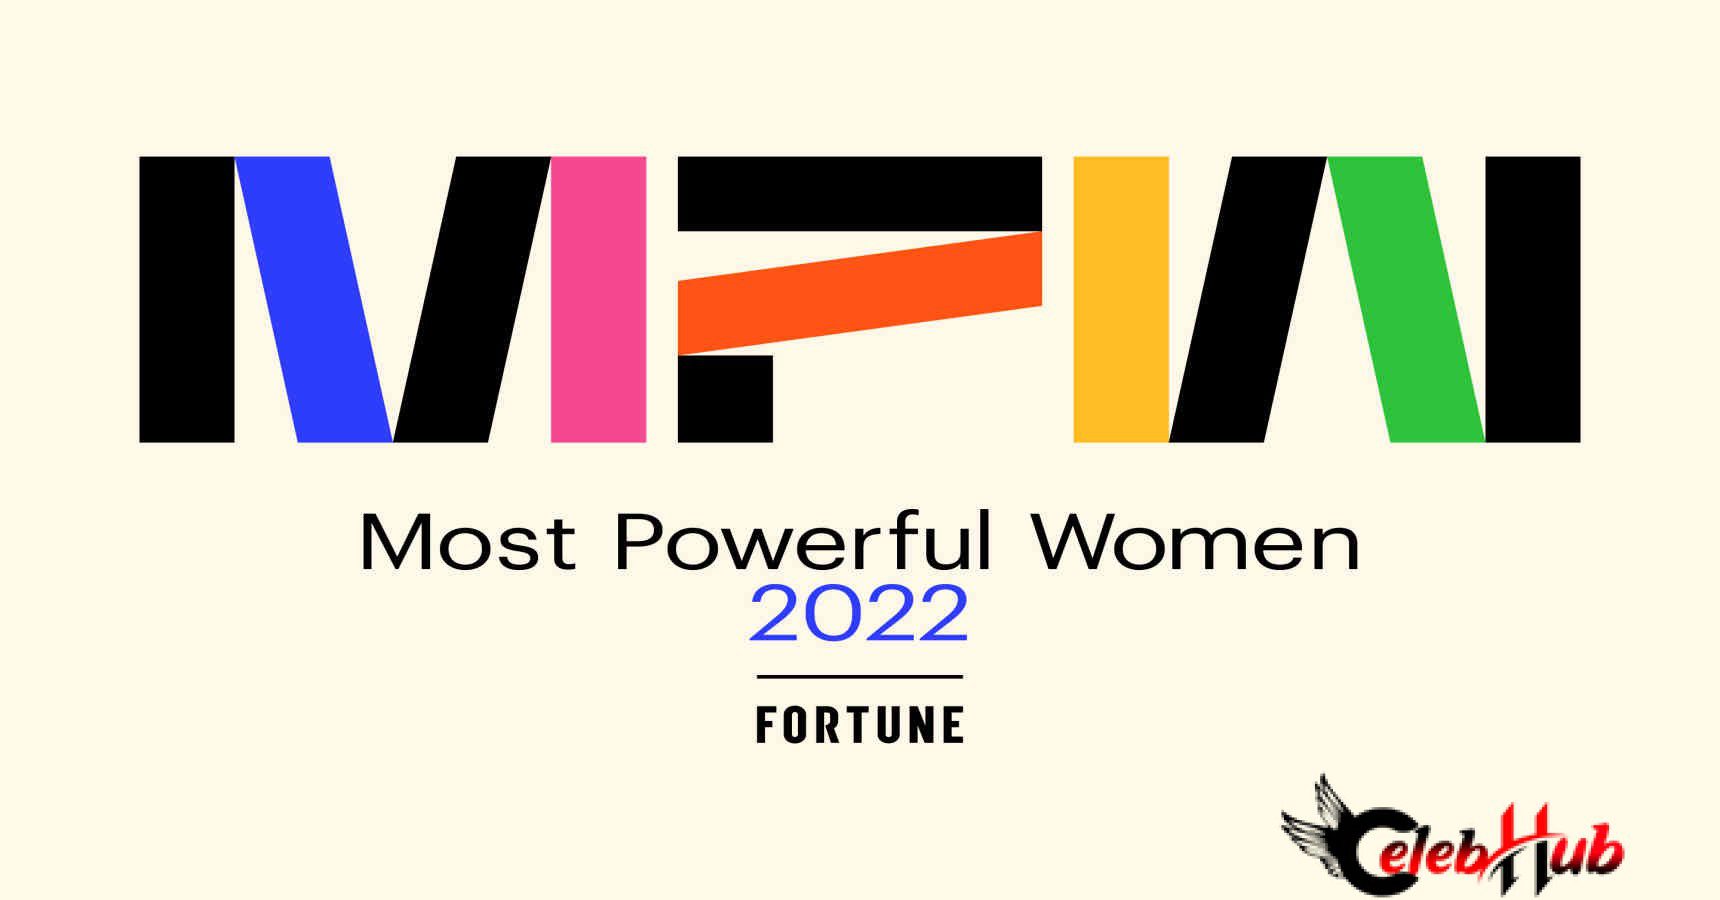 Fortune most powerful women 2022